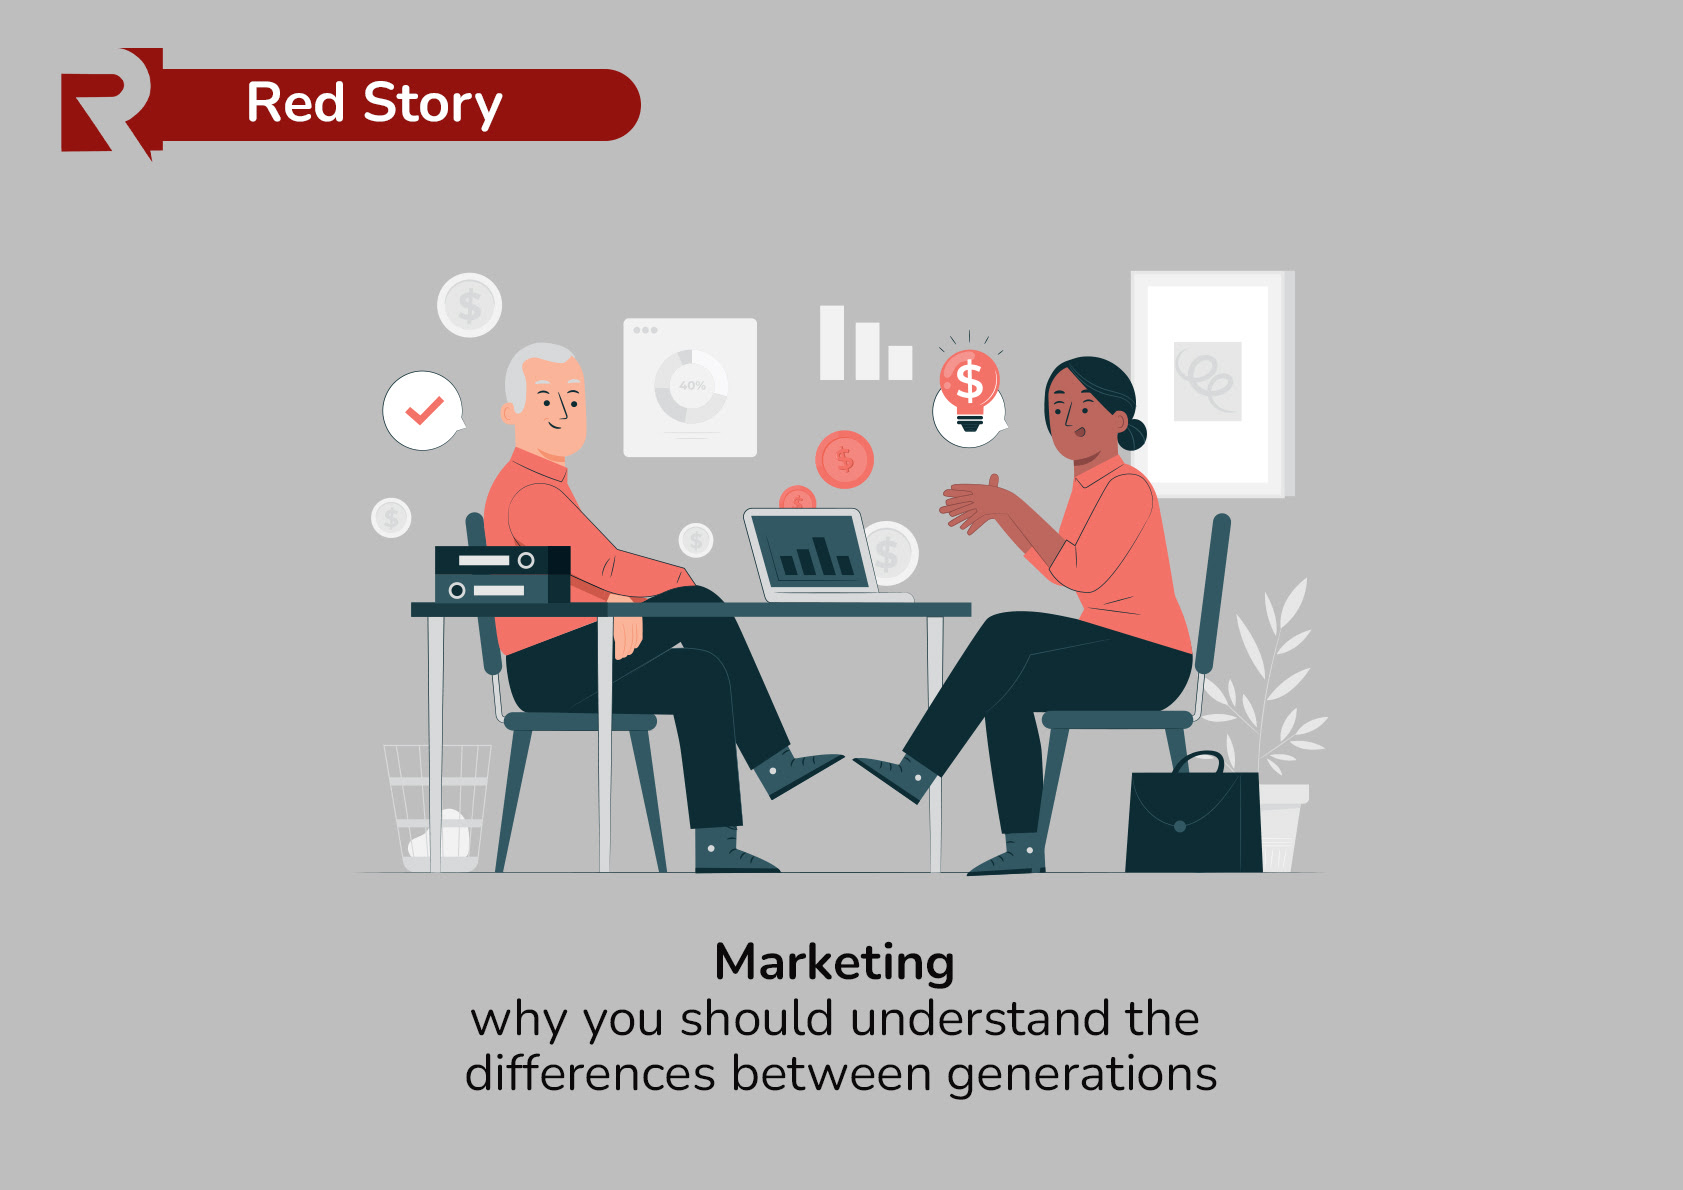 Marketing: why you should understand the differences between generations